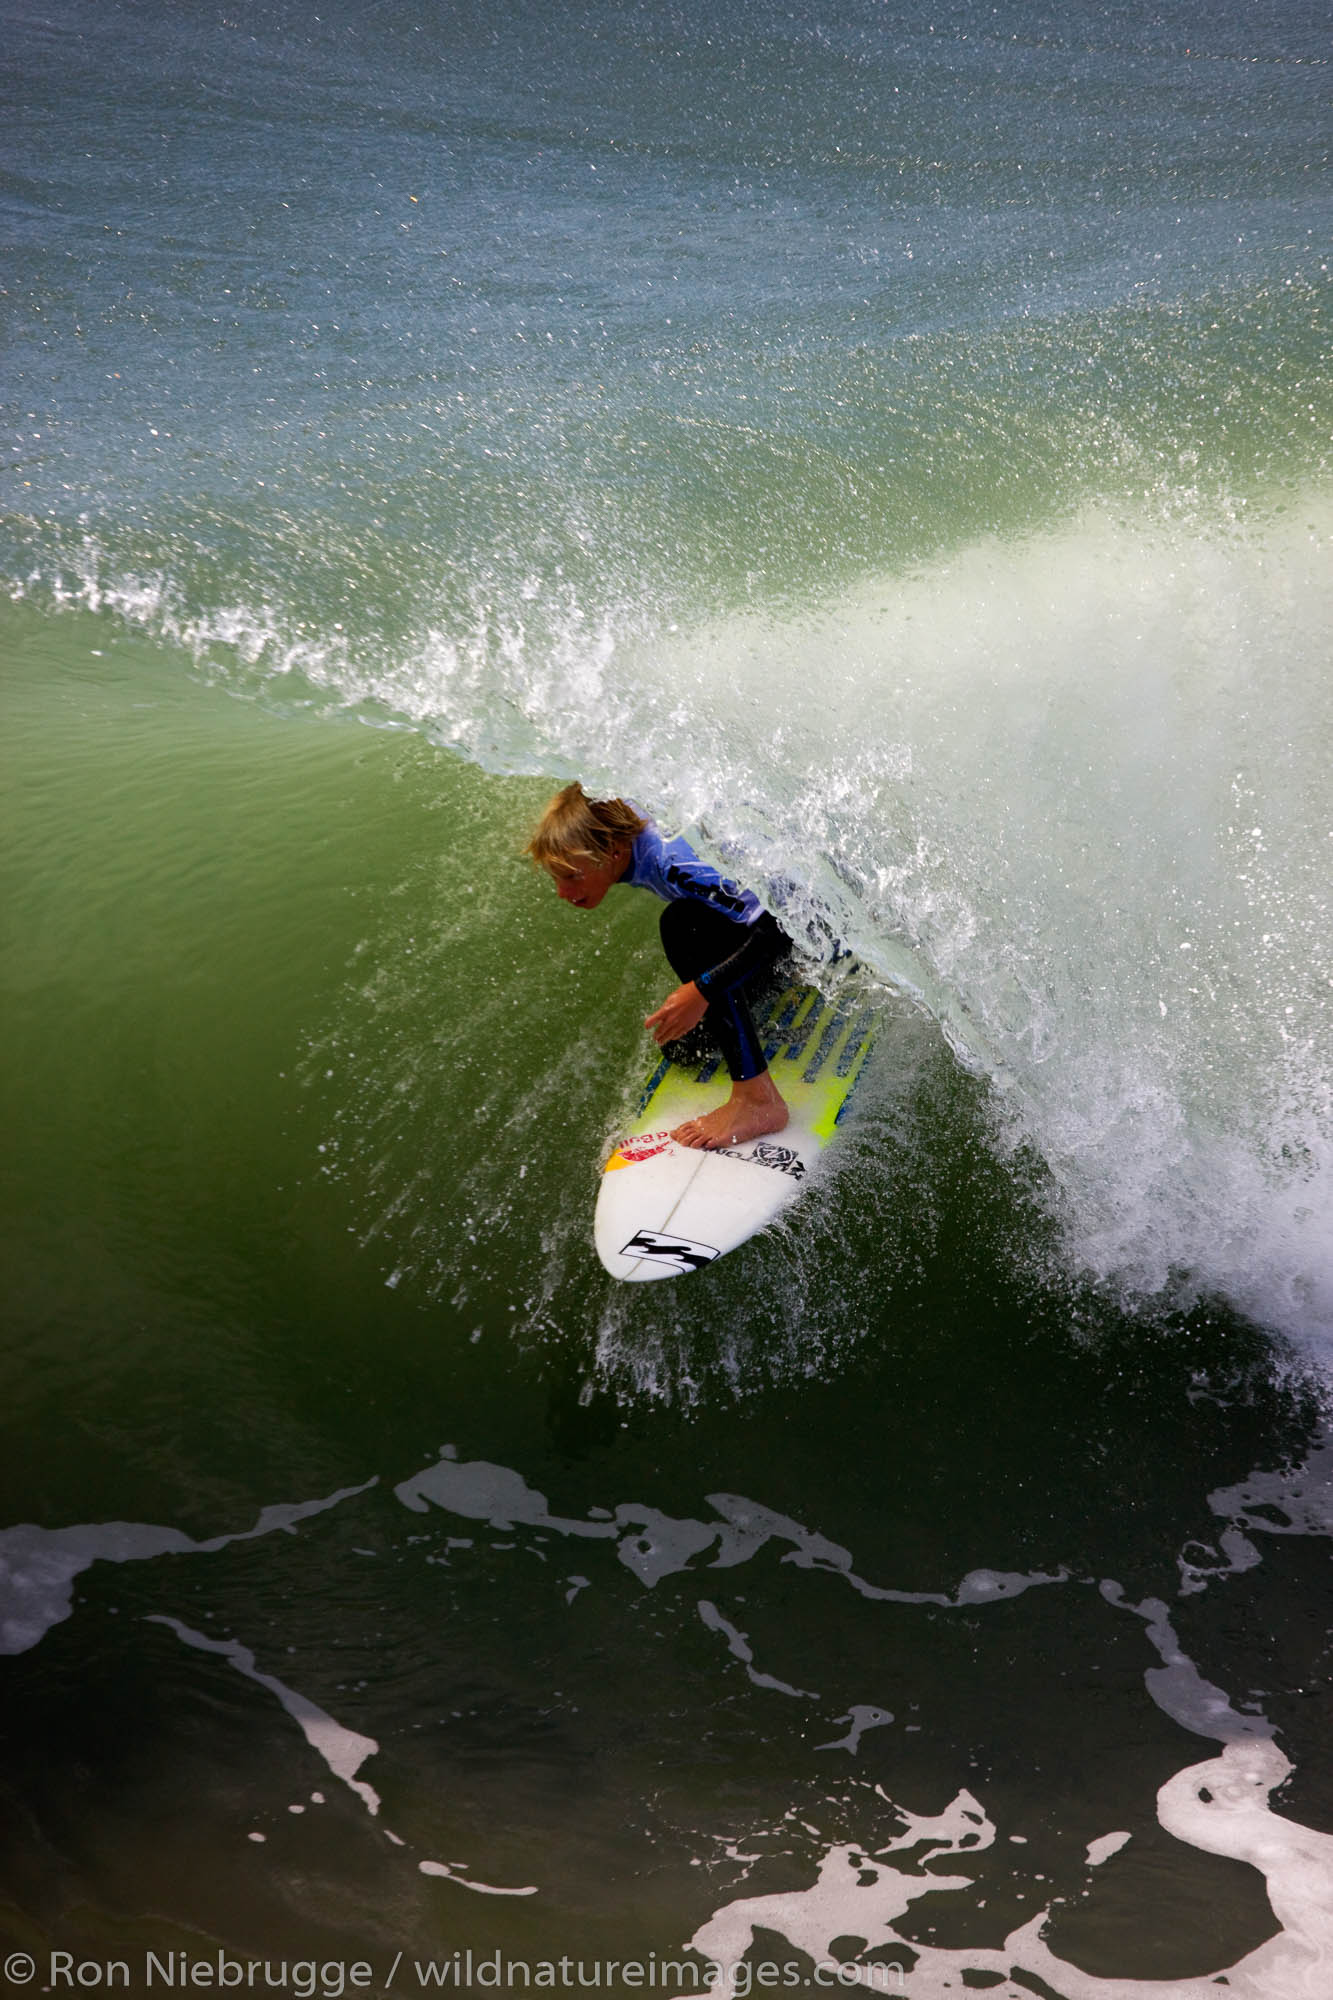 Kolohe Andino competing in the Katin Pro/Am surf competition at Huntington Beach Pier, Orange County, California.